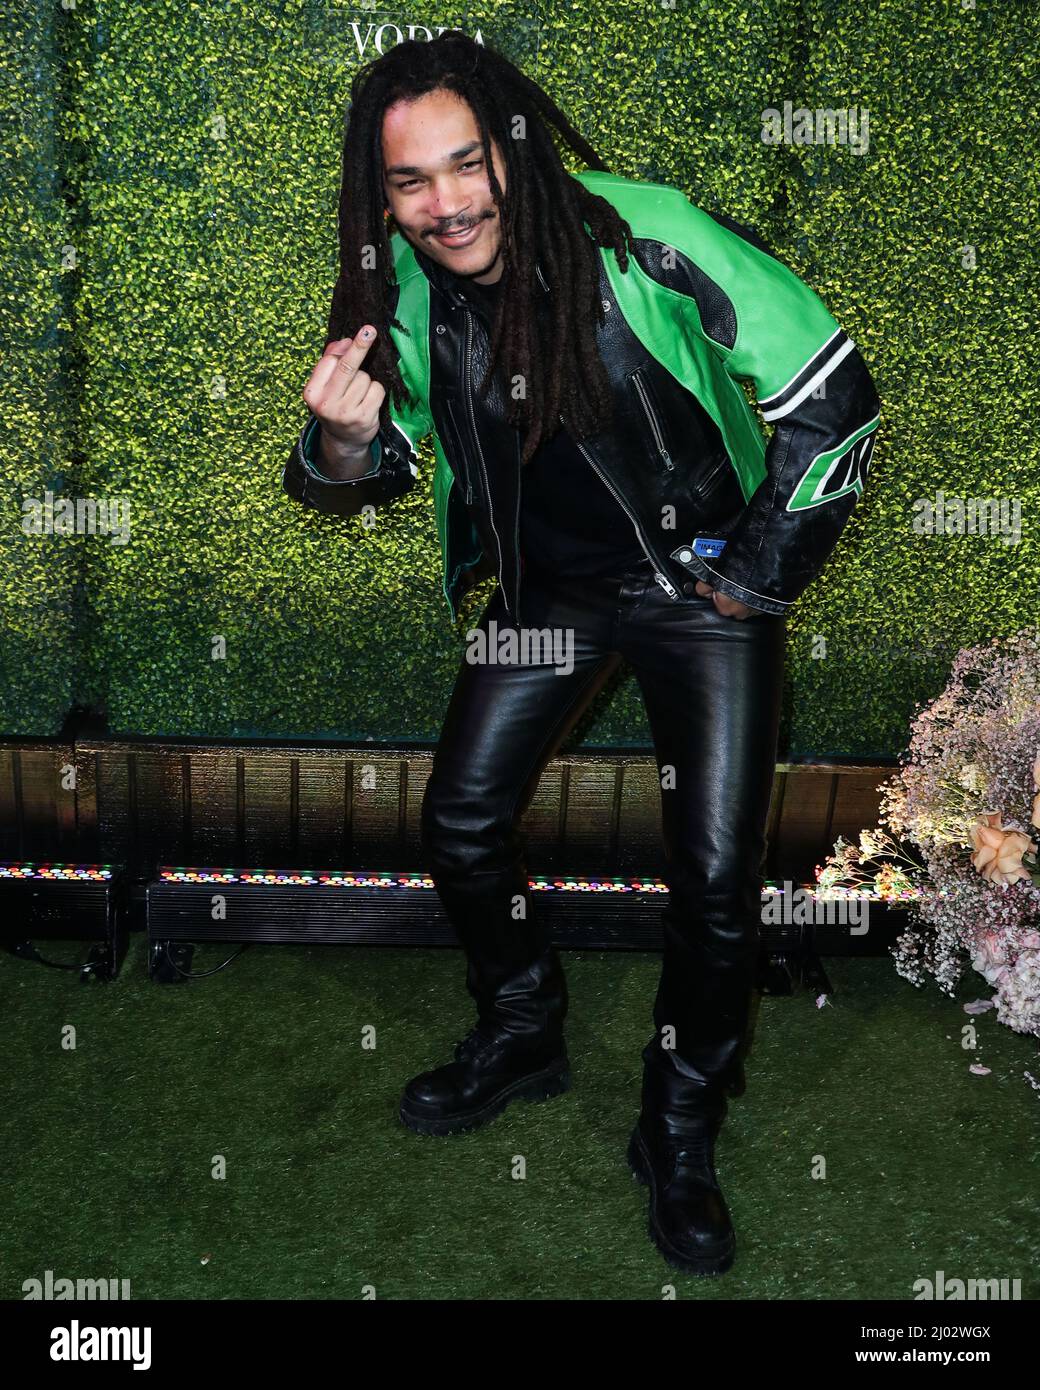 Los Angeles, United States. 15th Mar, 2022. LOS ANGELES, CALIFORNIA, USA - MARCH 15: Luka Sabbat arrives at the Sunny Vodka Launch Party held at Terminal 27 on March 15, 2022 in Los Angeles, California, United States. (Photo by Xavier Collin/Image Press Agency) Credit: Image Press Agency/Alamy Live News Stock Photo